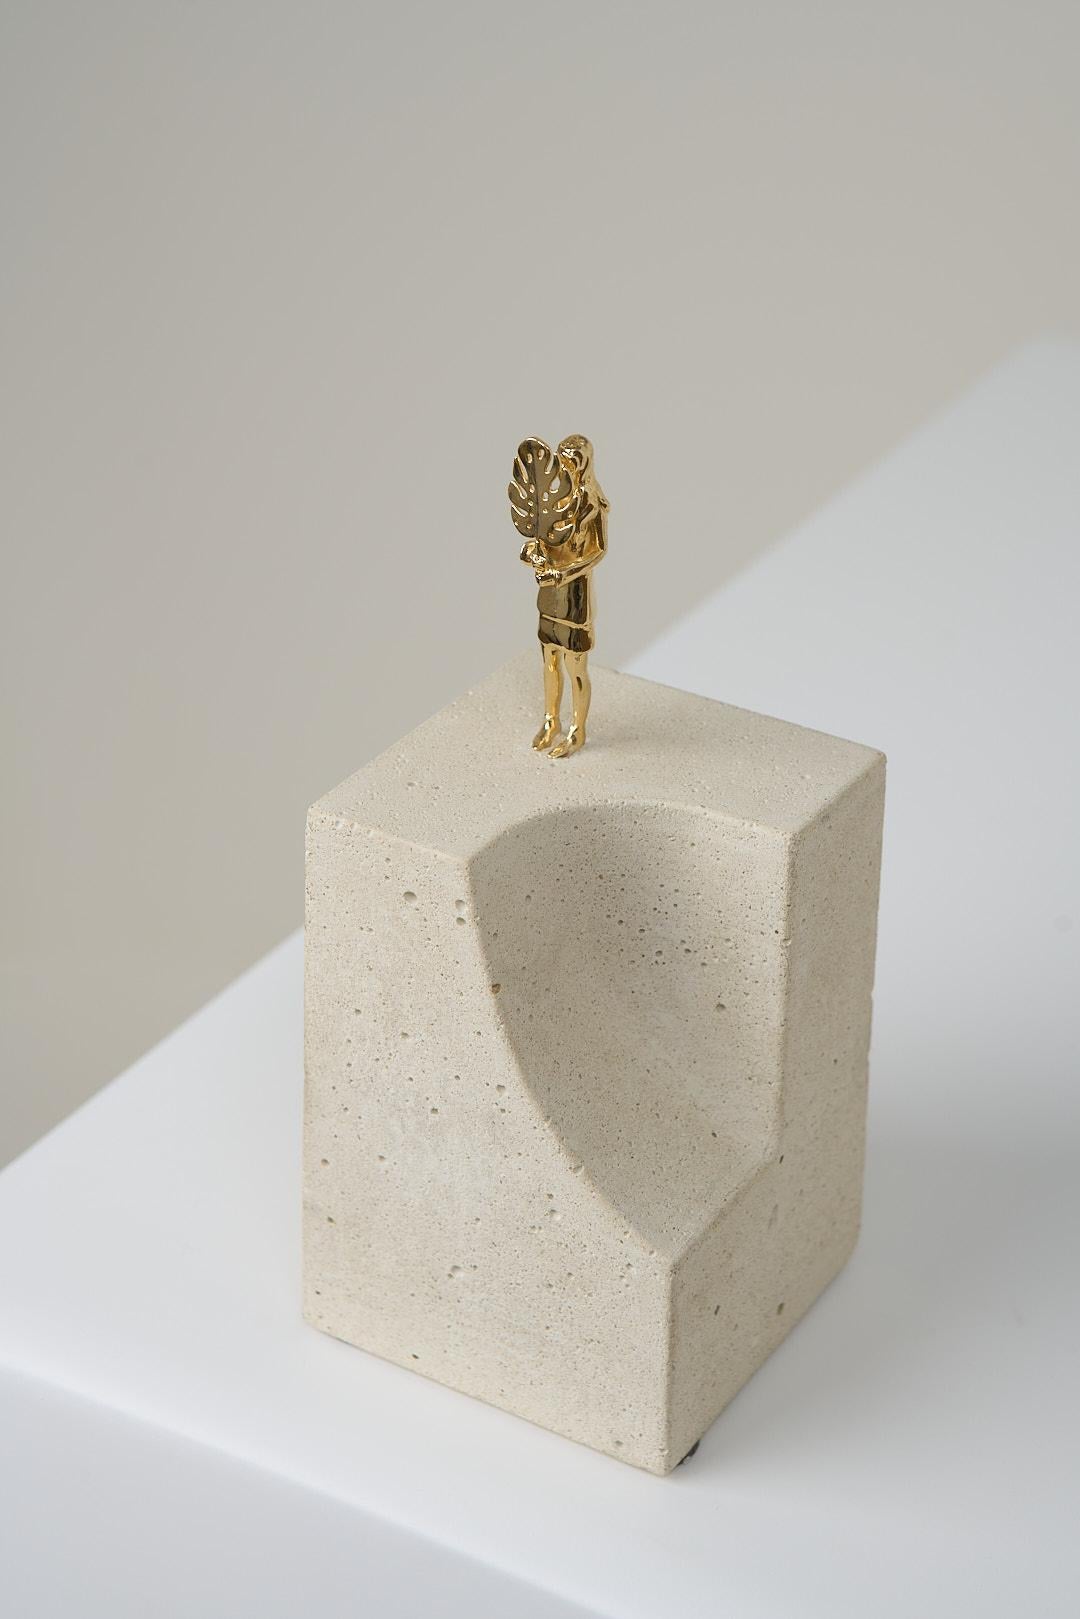 Sinestesia Series, Concrete and Brass Girl Sculpture N1 For Sale 1